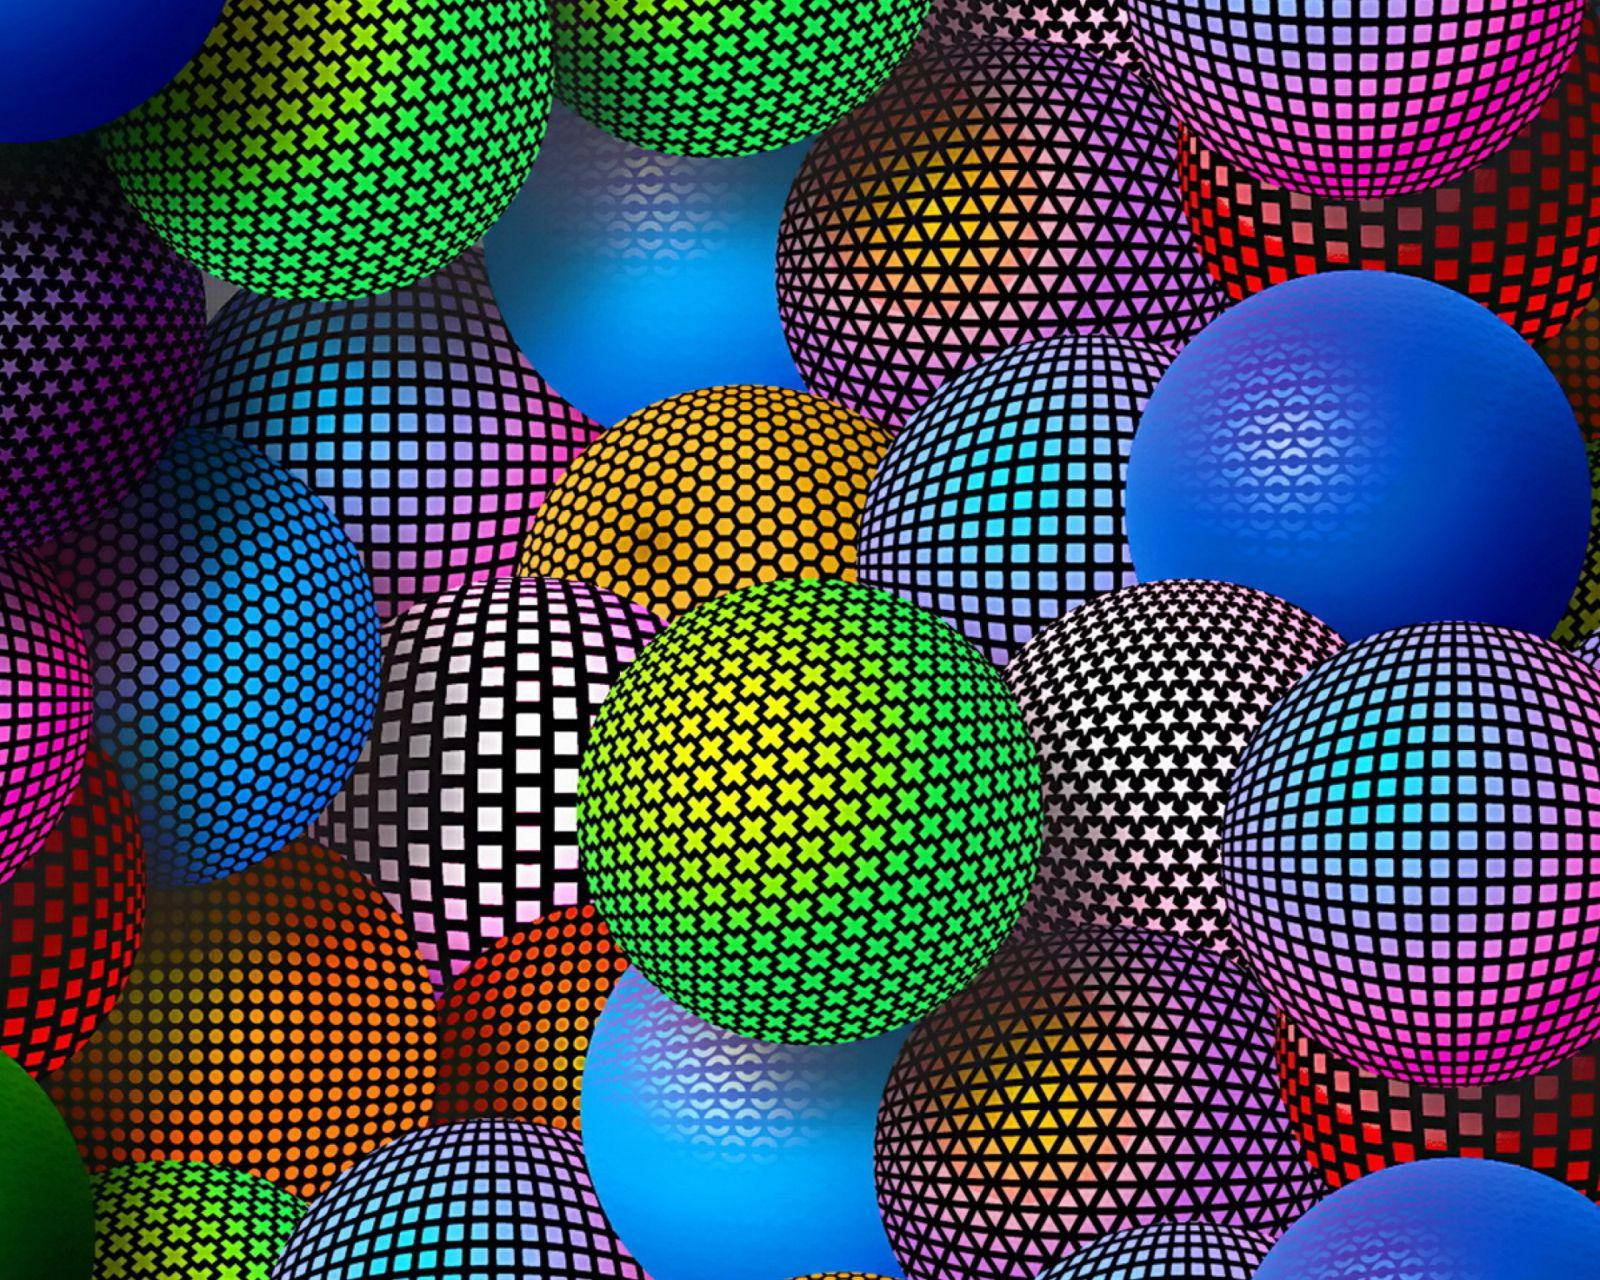 Colourful Spheres Samsung Galaxy Tablet Wallpaper